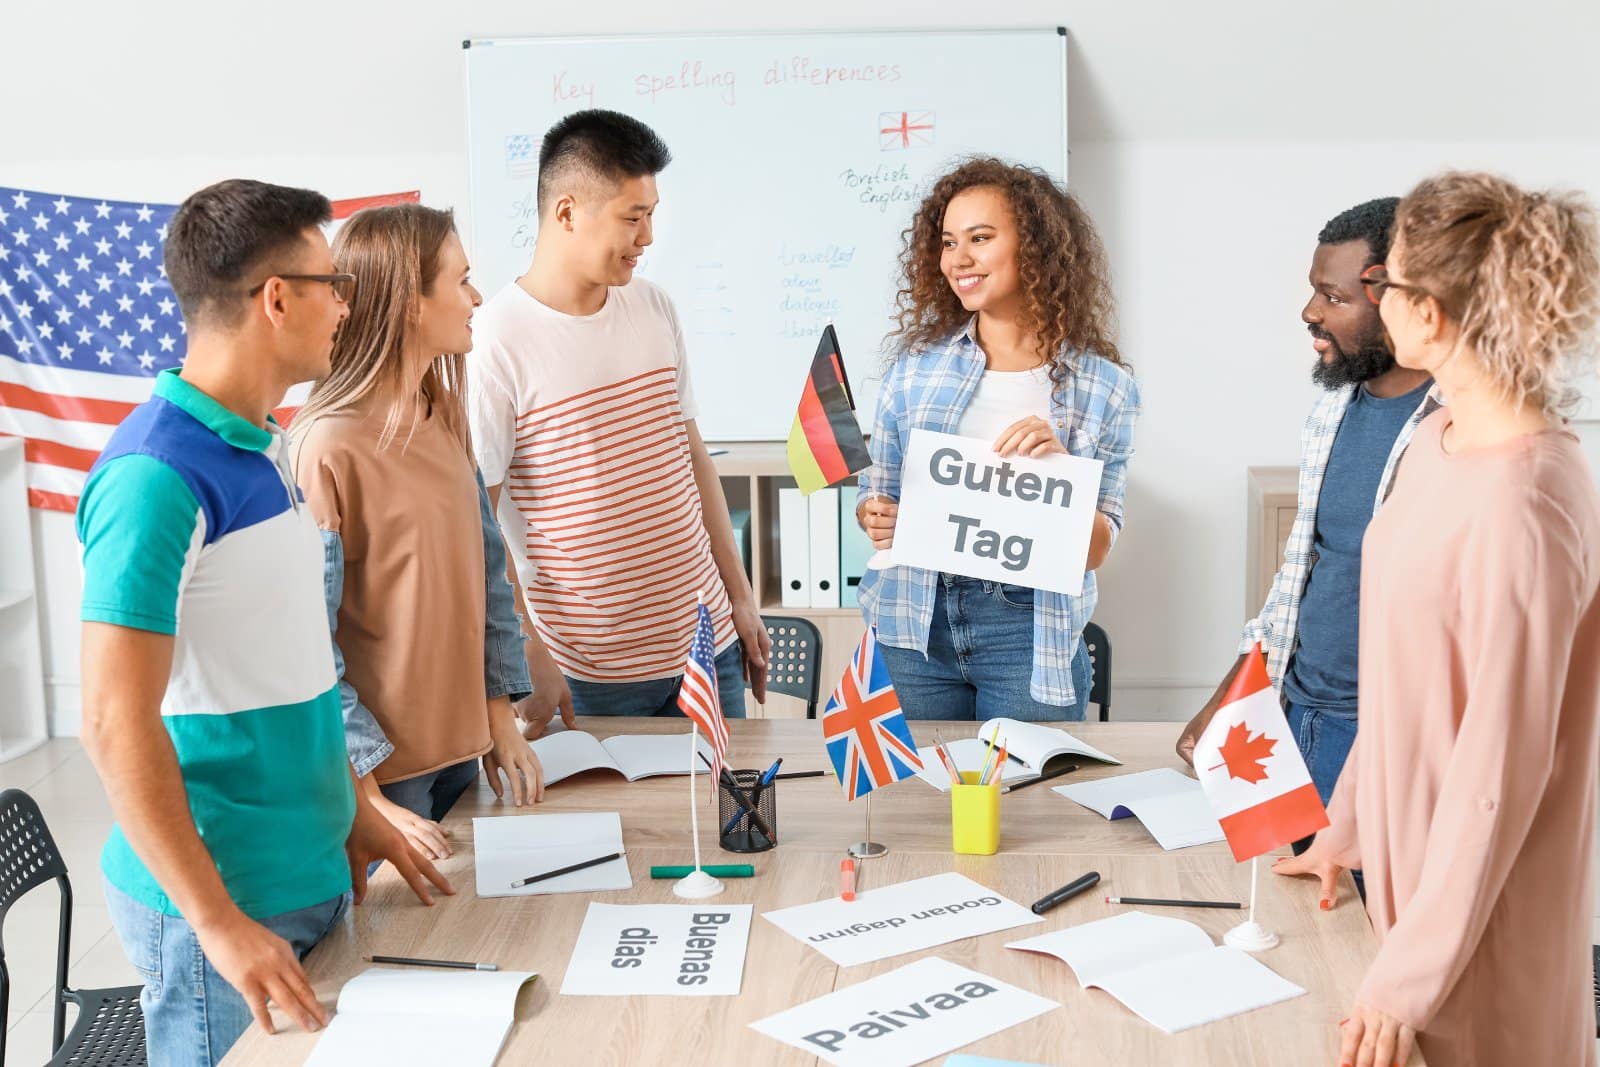 Image Credit: Shutterstock / Pixel-Shot <p>Whether through formal classes or travel abroad, language skills can be a valuable asset. Traveling often provides opportunities to practice a new language in real-life situations, while classroom learning can help you develop a solid foundation and useful skills.</p>